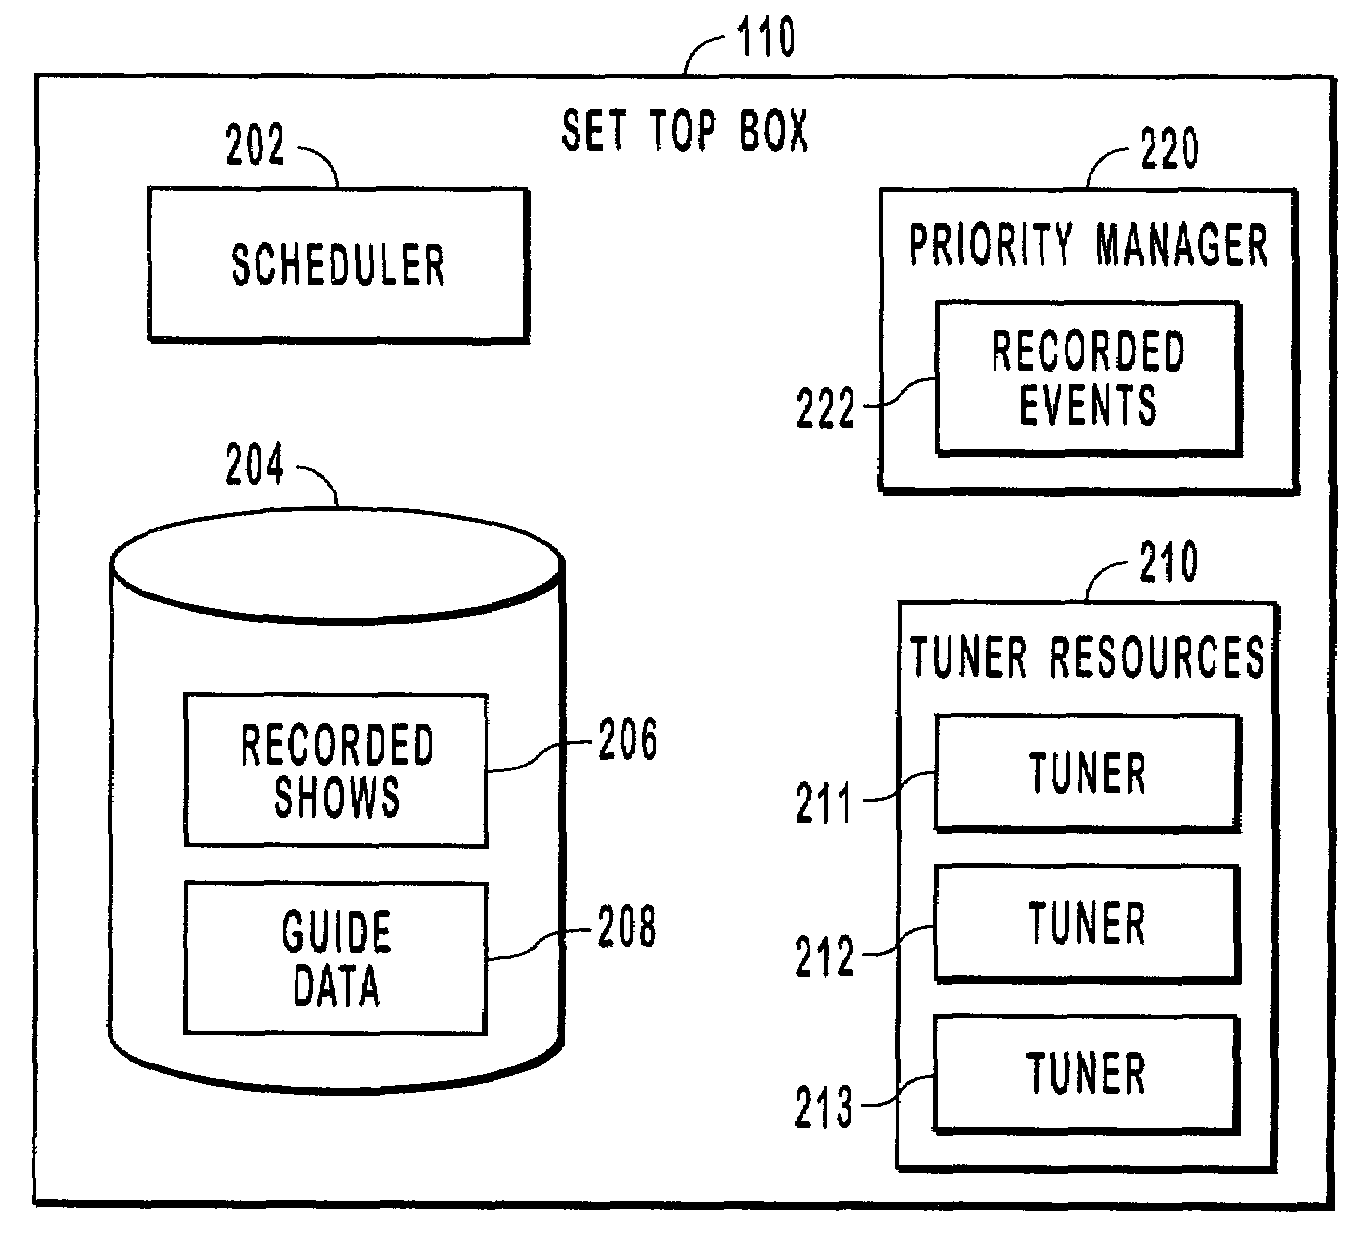 Managing record events